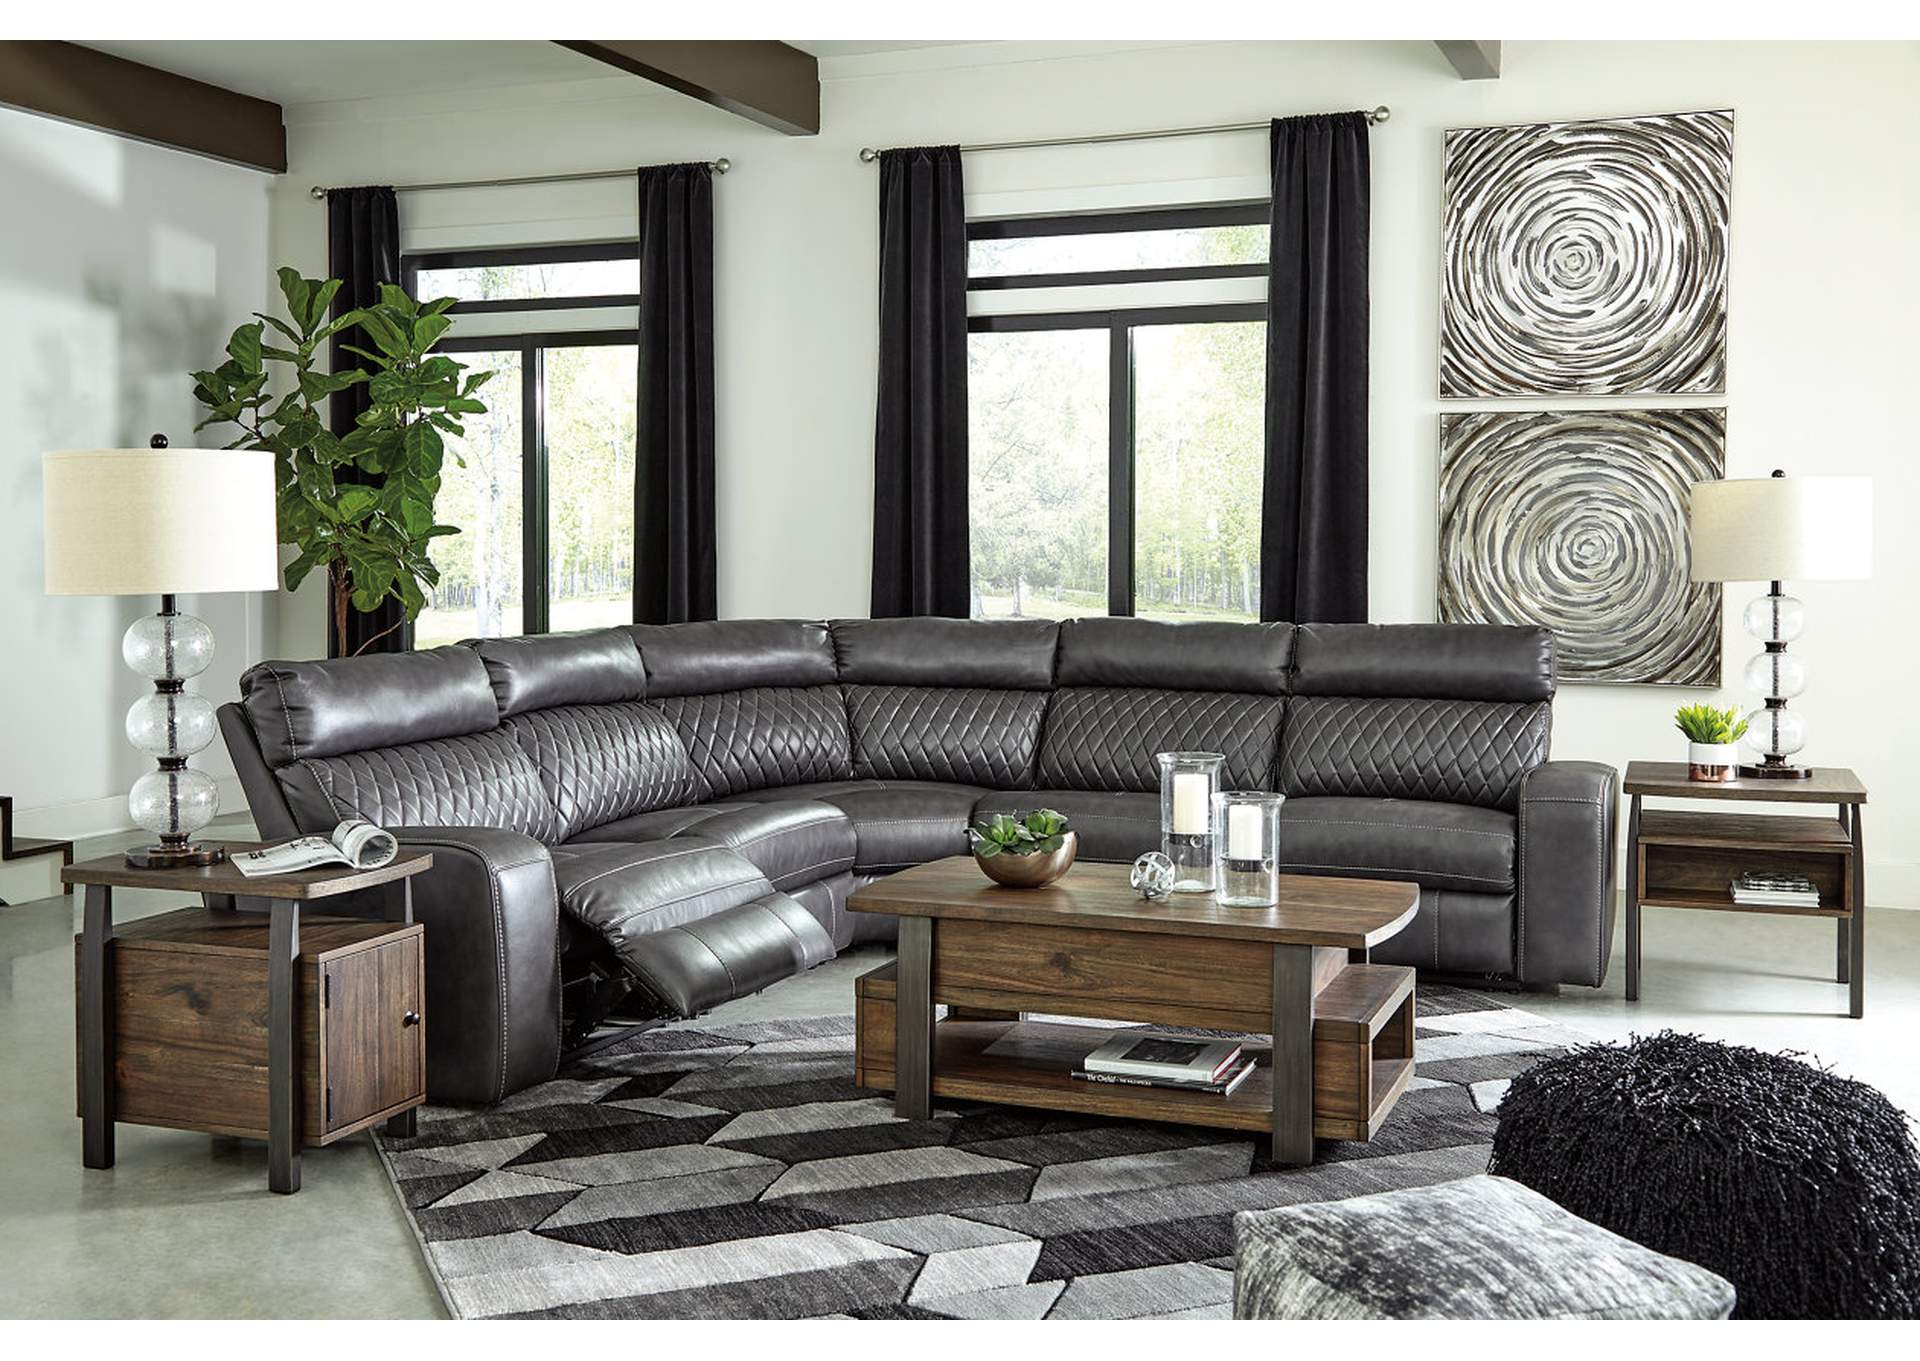 Samperstone 5-Piece Power Reclining Sectional,Signature Design By Ashley